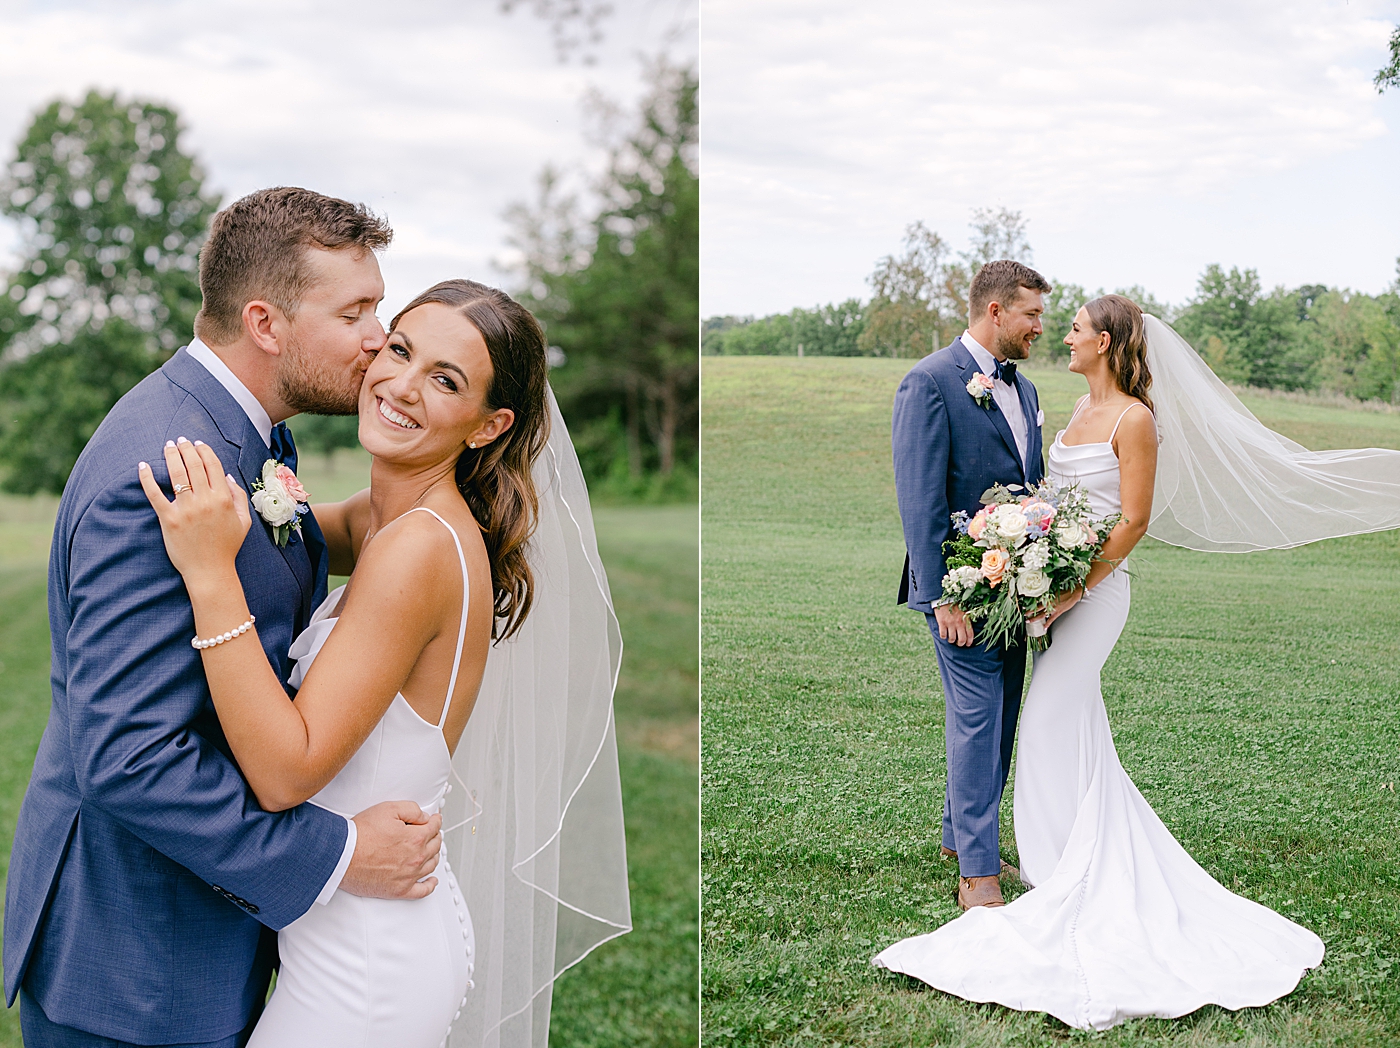 Bride and groom portraits s| Image by Hope Helmuth Photography